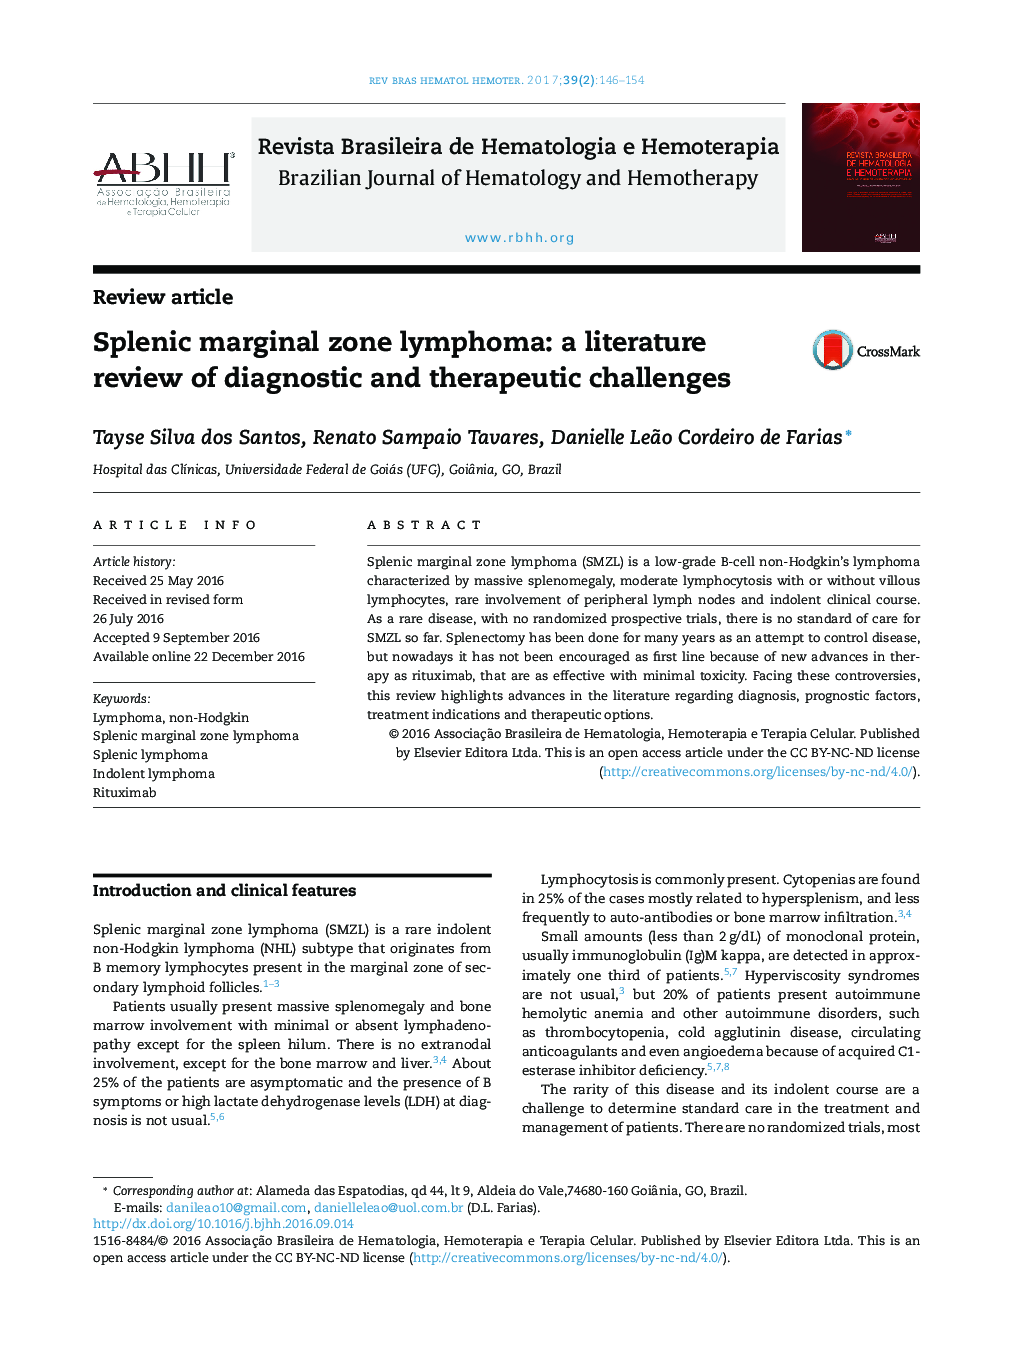 Splenic marginal zone lymphoma: a literature review of diagnostic and therapeutic challenges